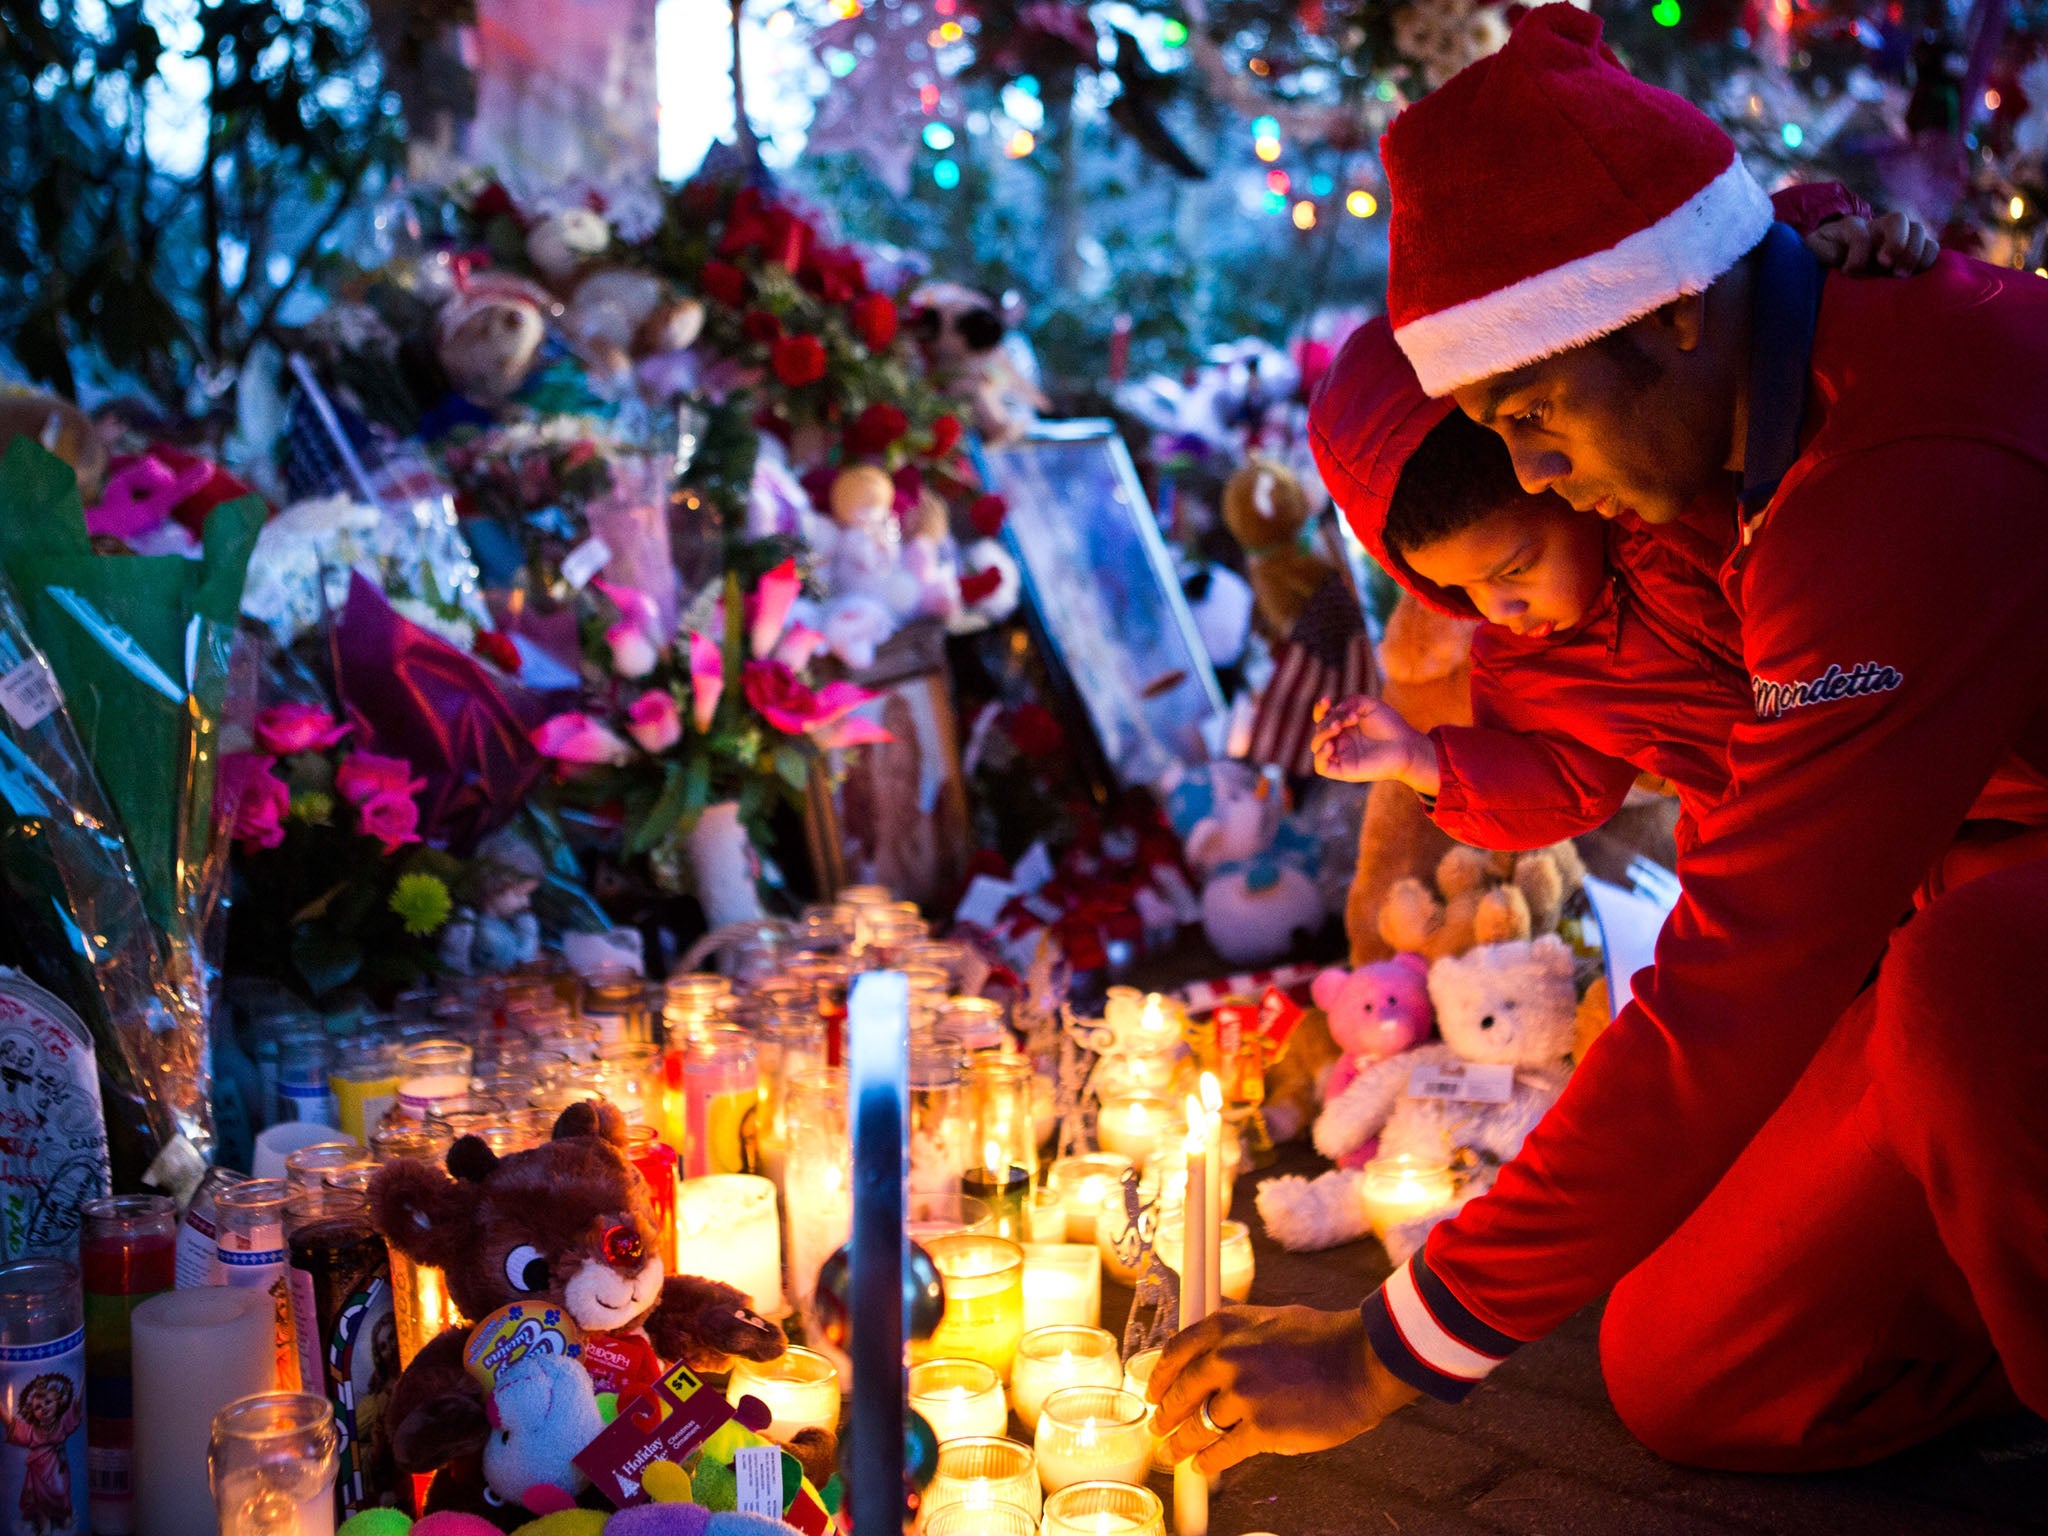 The people of Newtown face Christmas after the tragedy